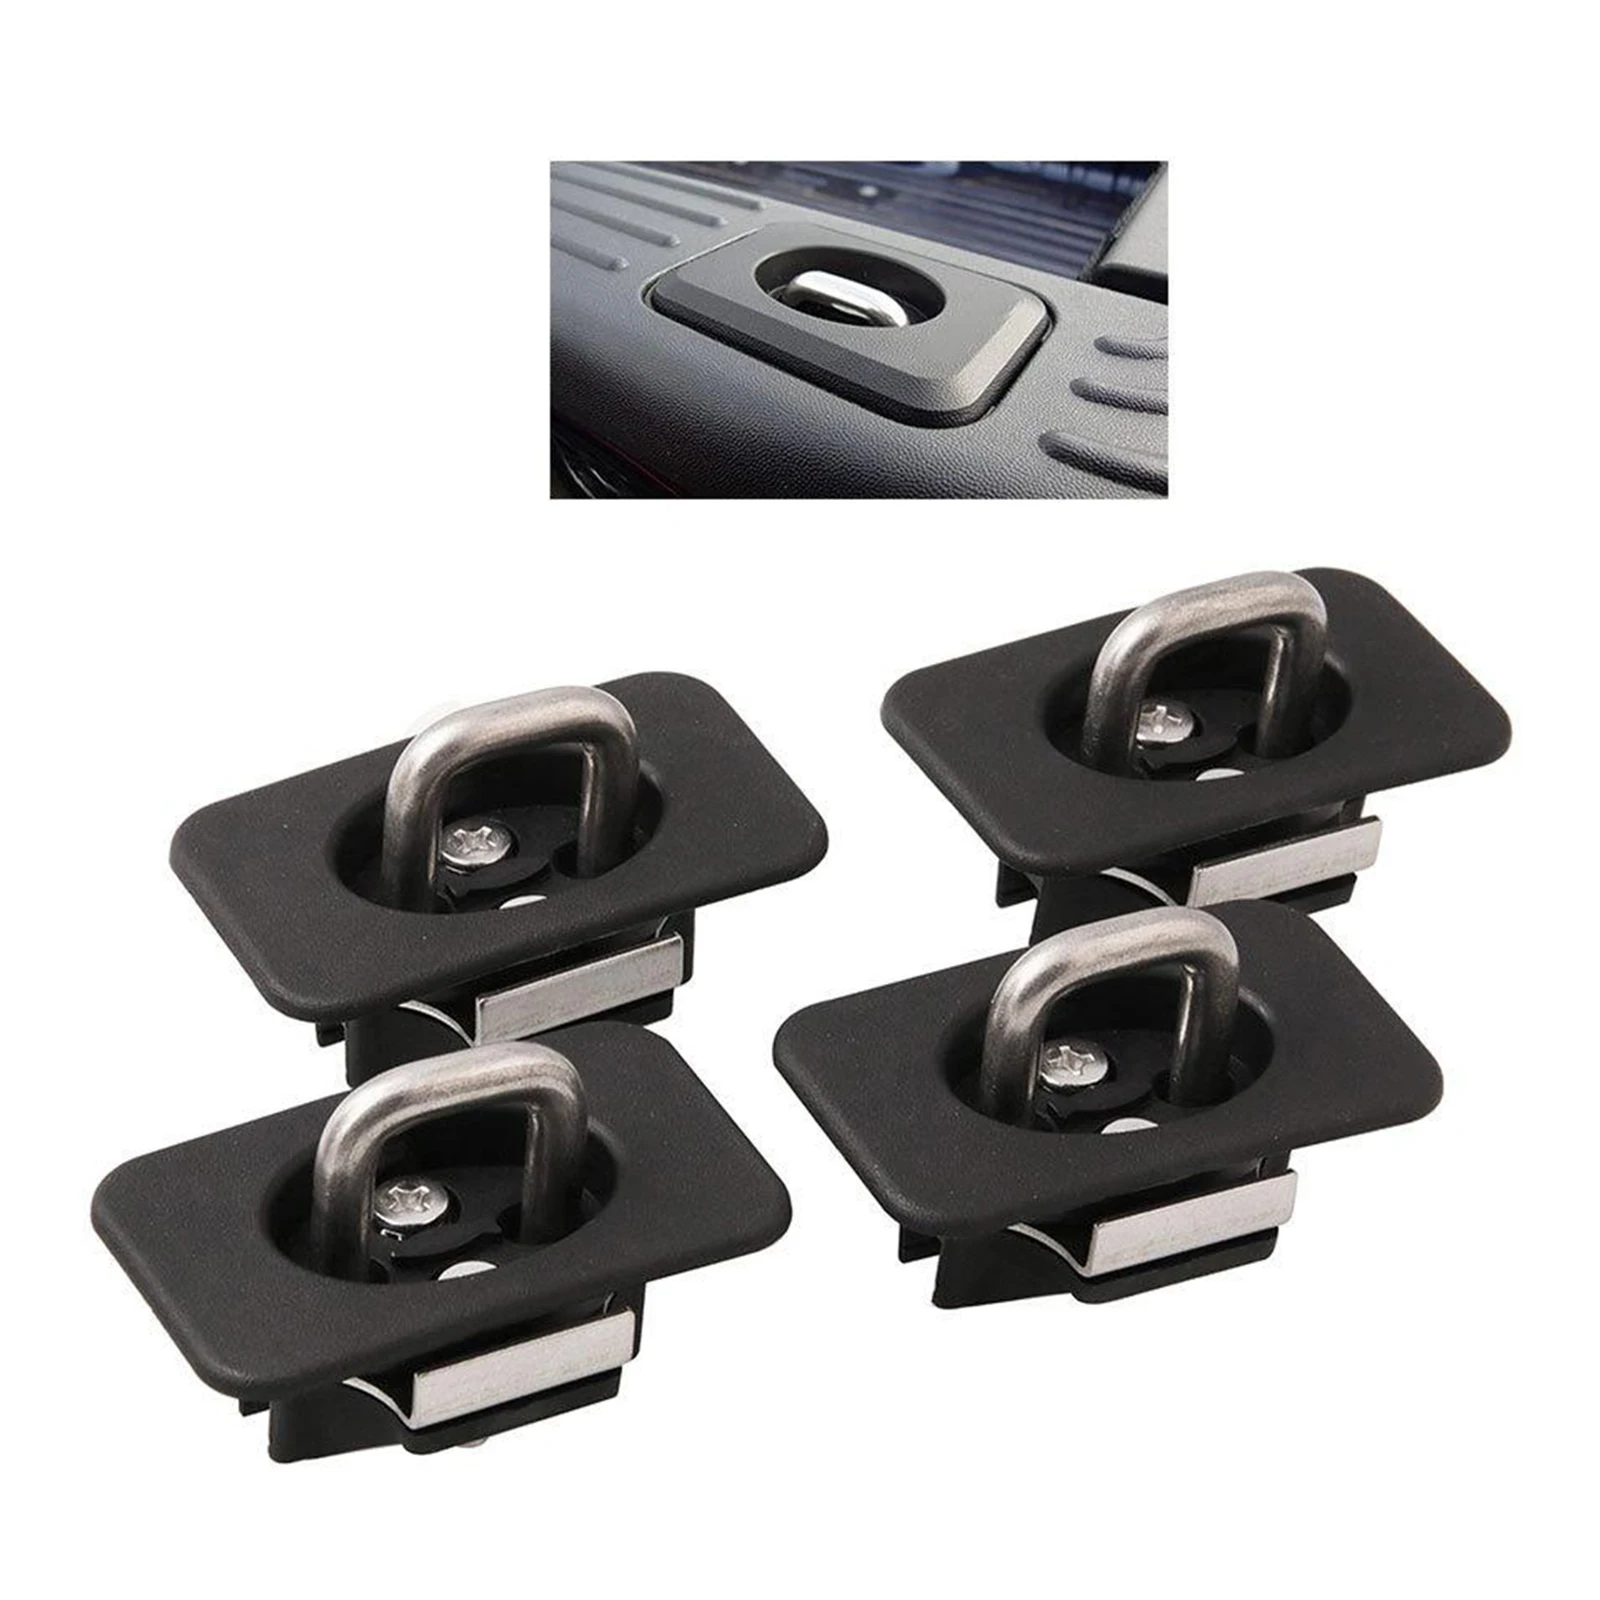 4pieces Truck Tie Down Anchors for Ford F 150 1998-2014 Super-Duty Car Part